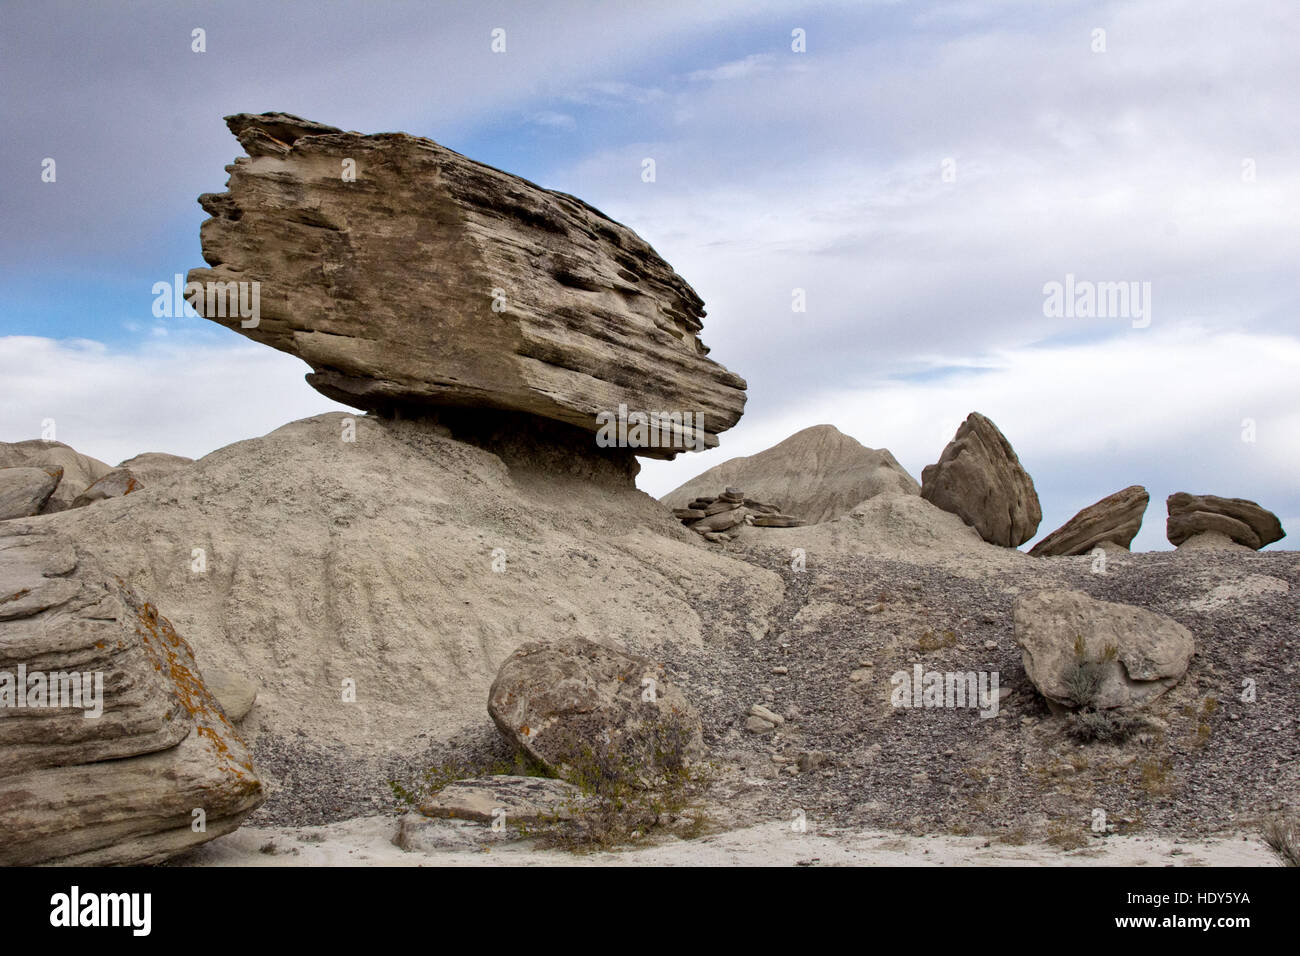 Hiking paths through Toadstool Geologic Park take you past ancient rock formations in a starkly beautiful lunar-like topology Stock Photo